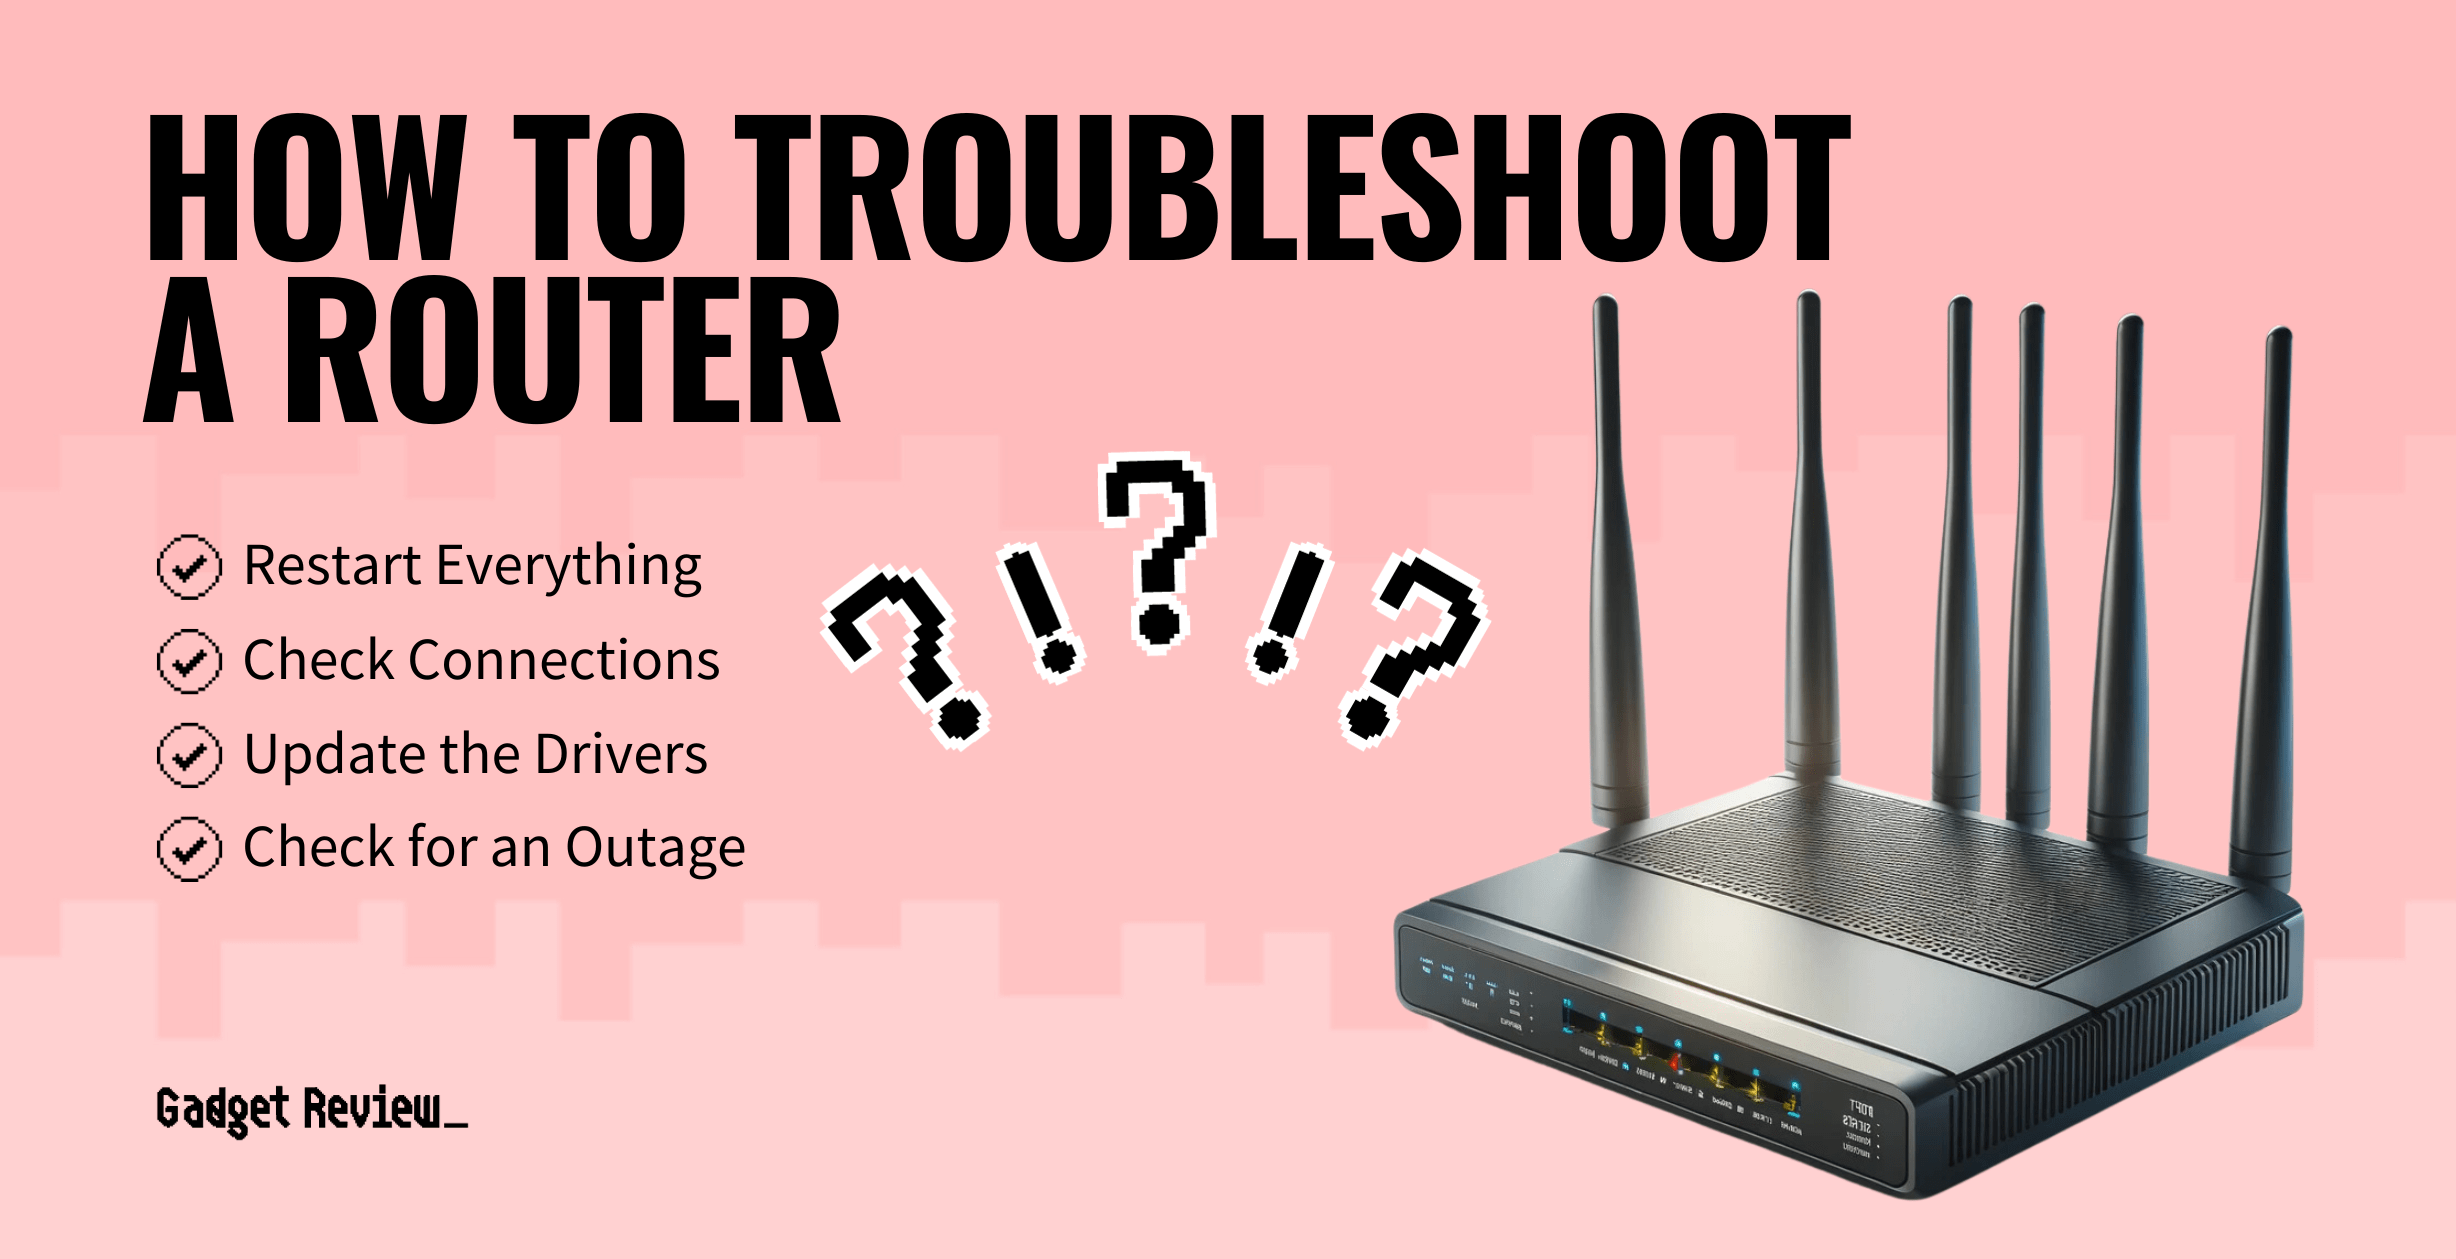 how to troubleshoot router guide